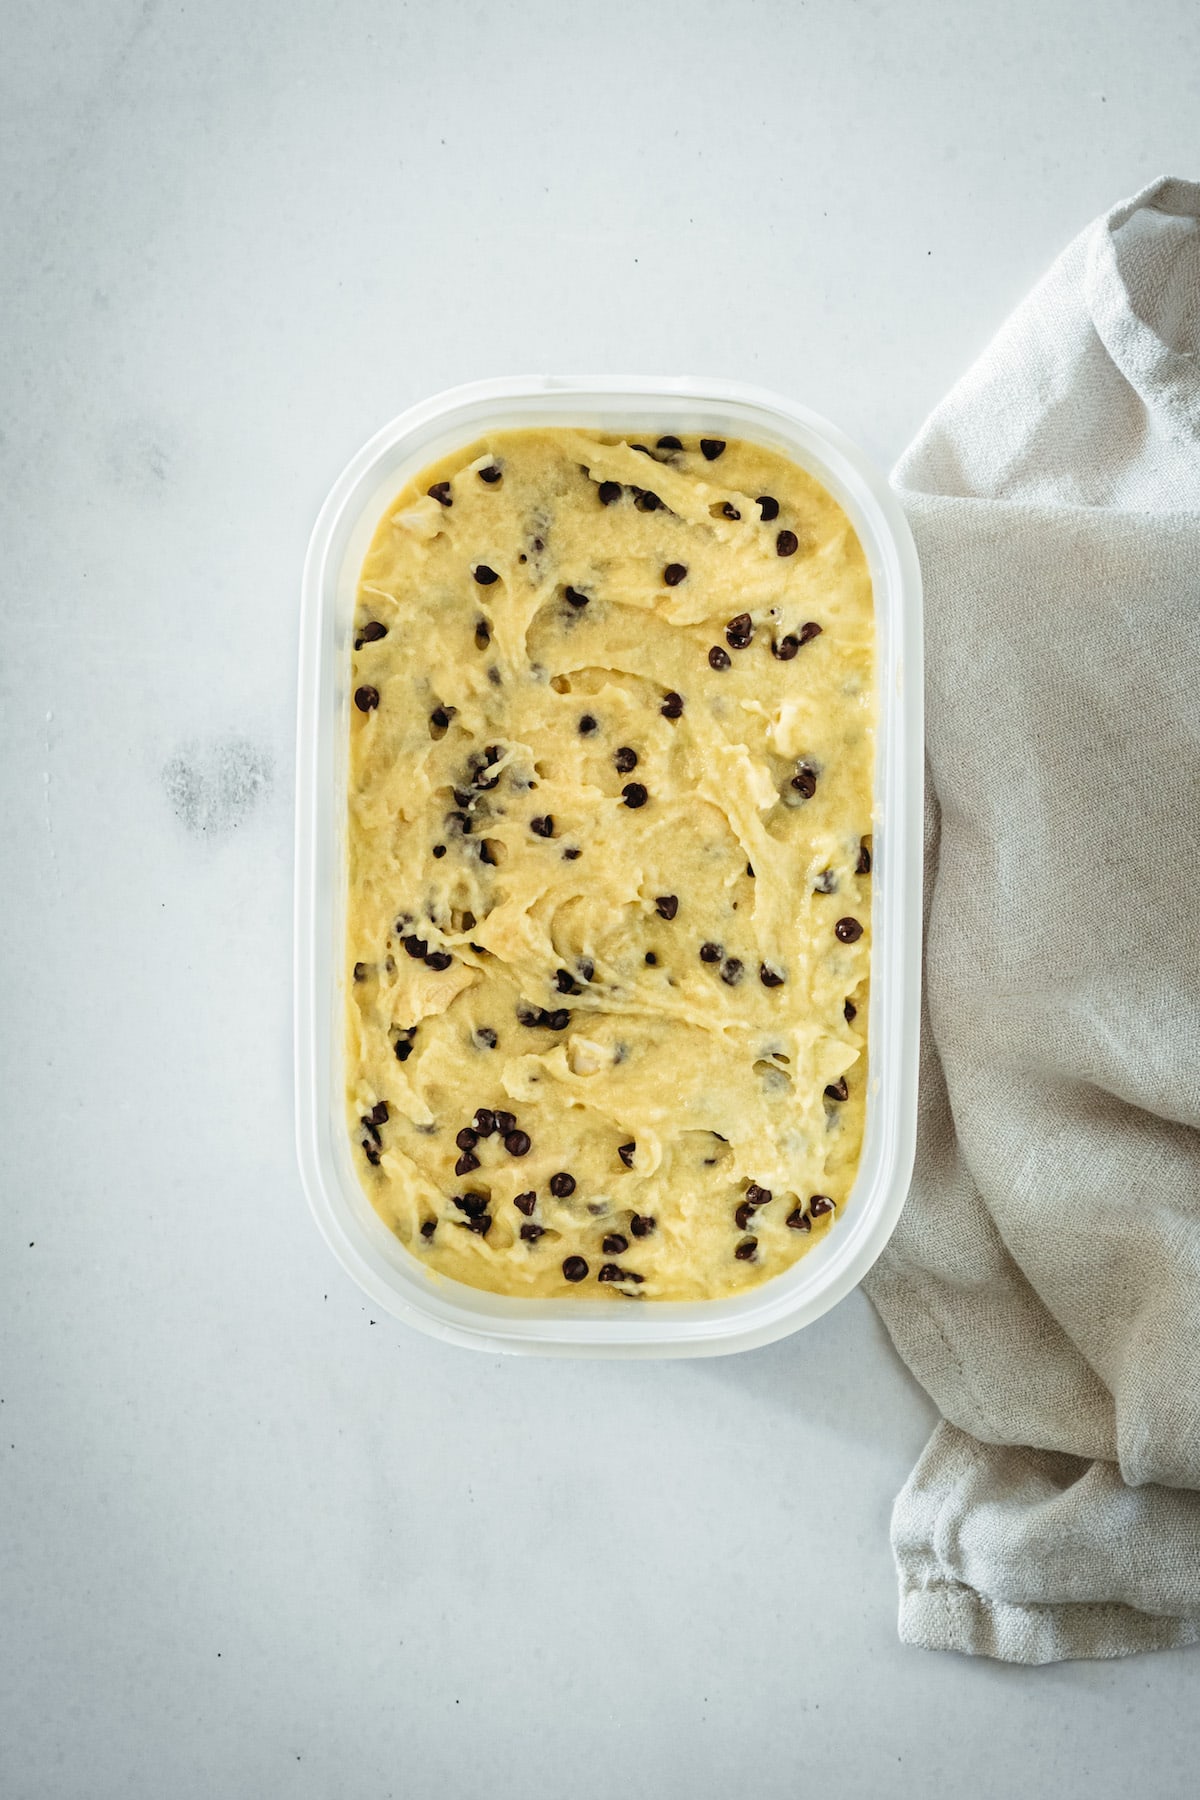 Overhead view of bread batter with chocolate chips